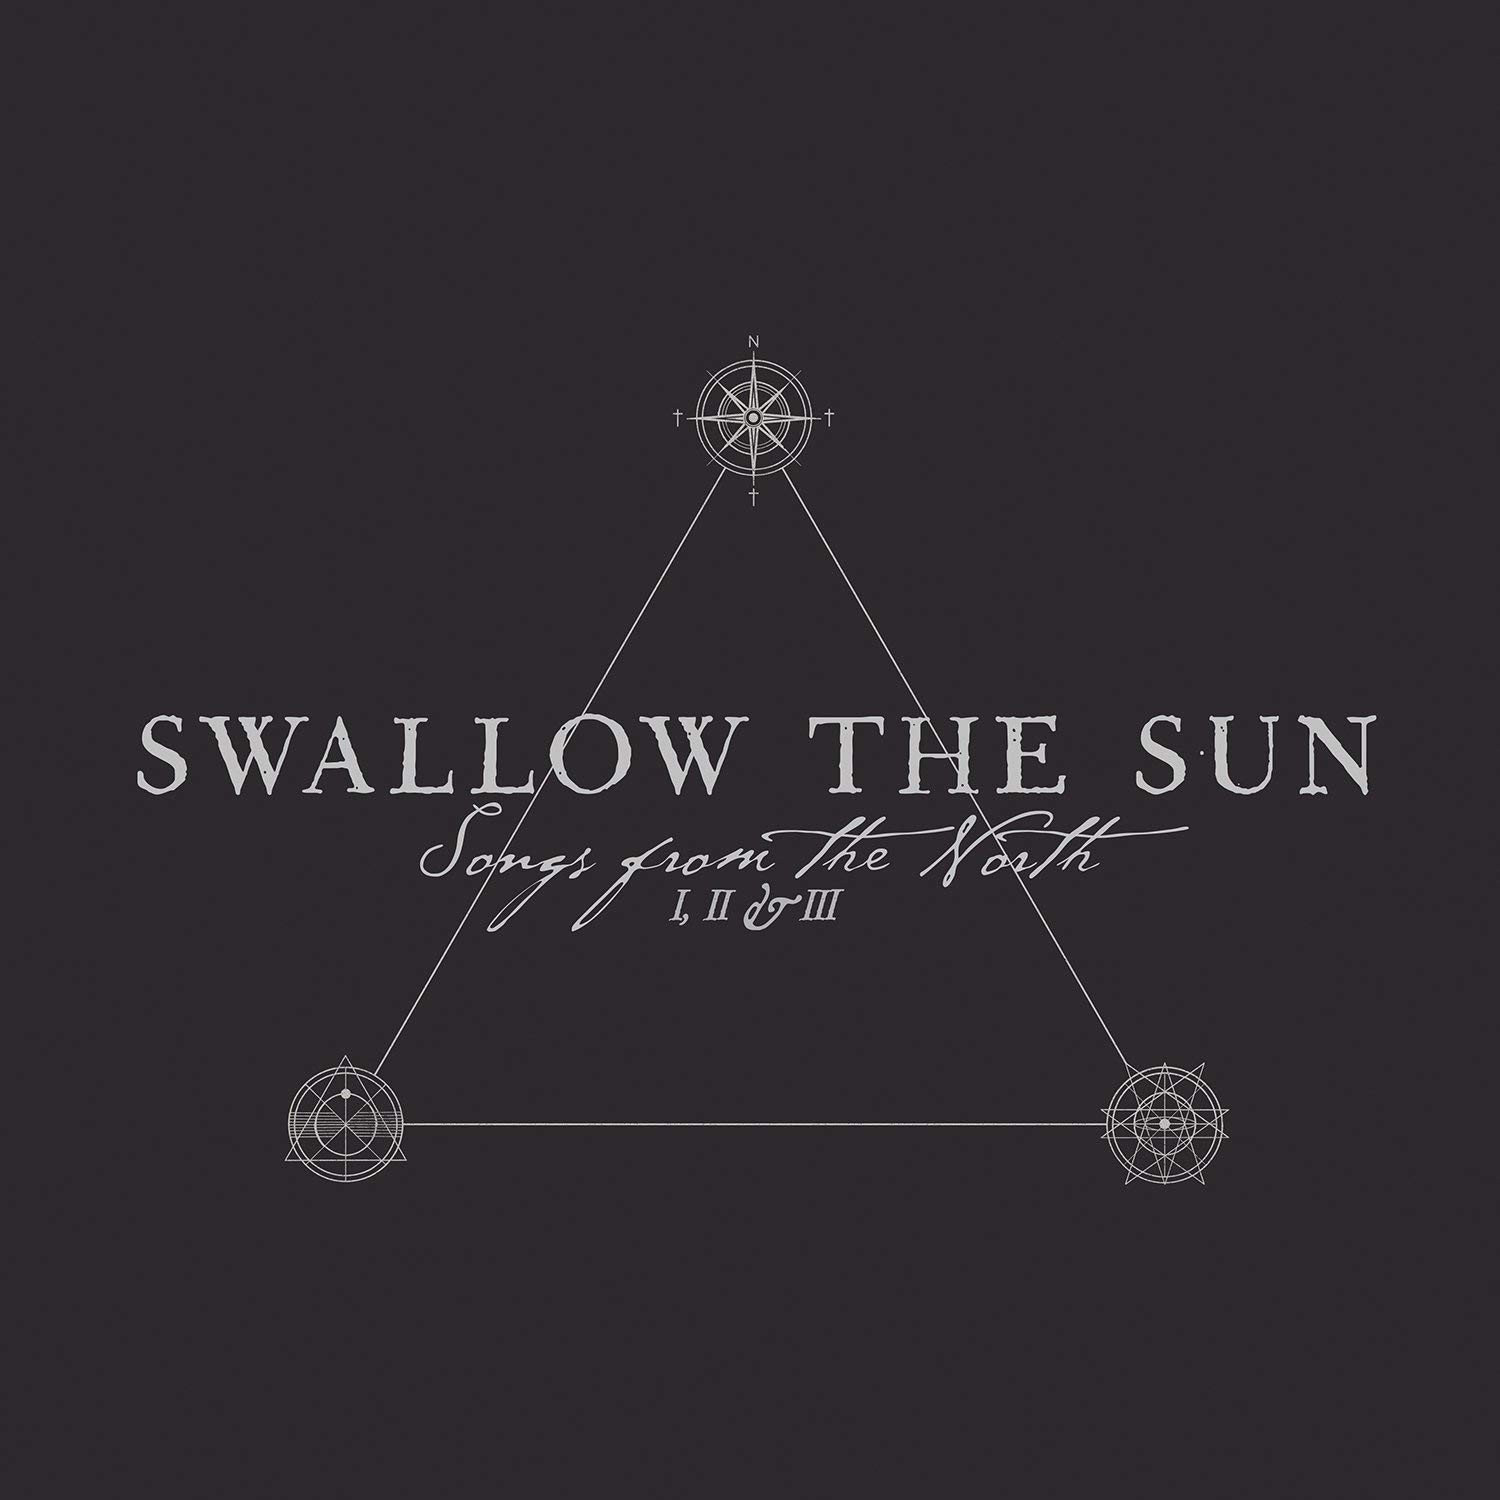 Disco de vinilo Swallow The Sun Songs From the North I, II & III (5 LP)